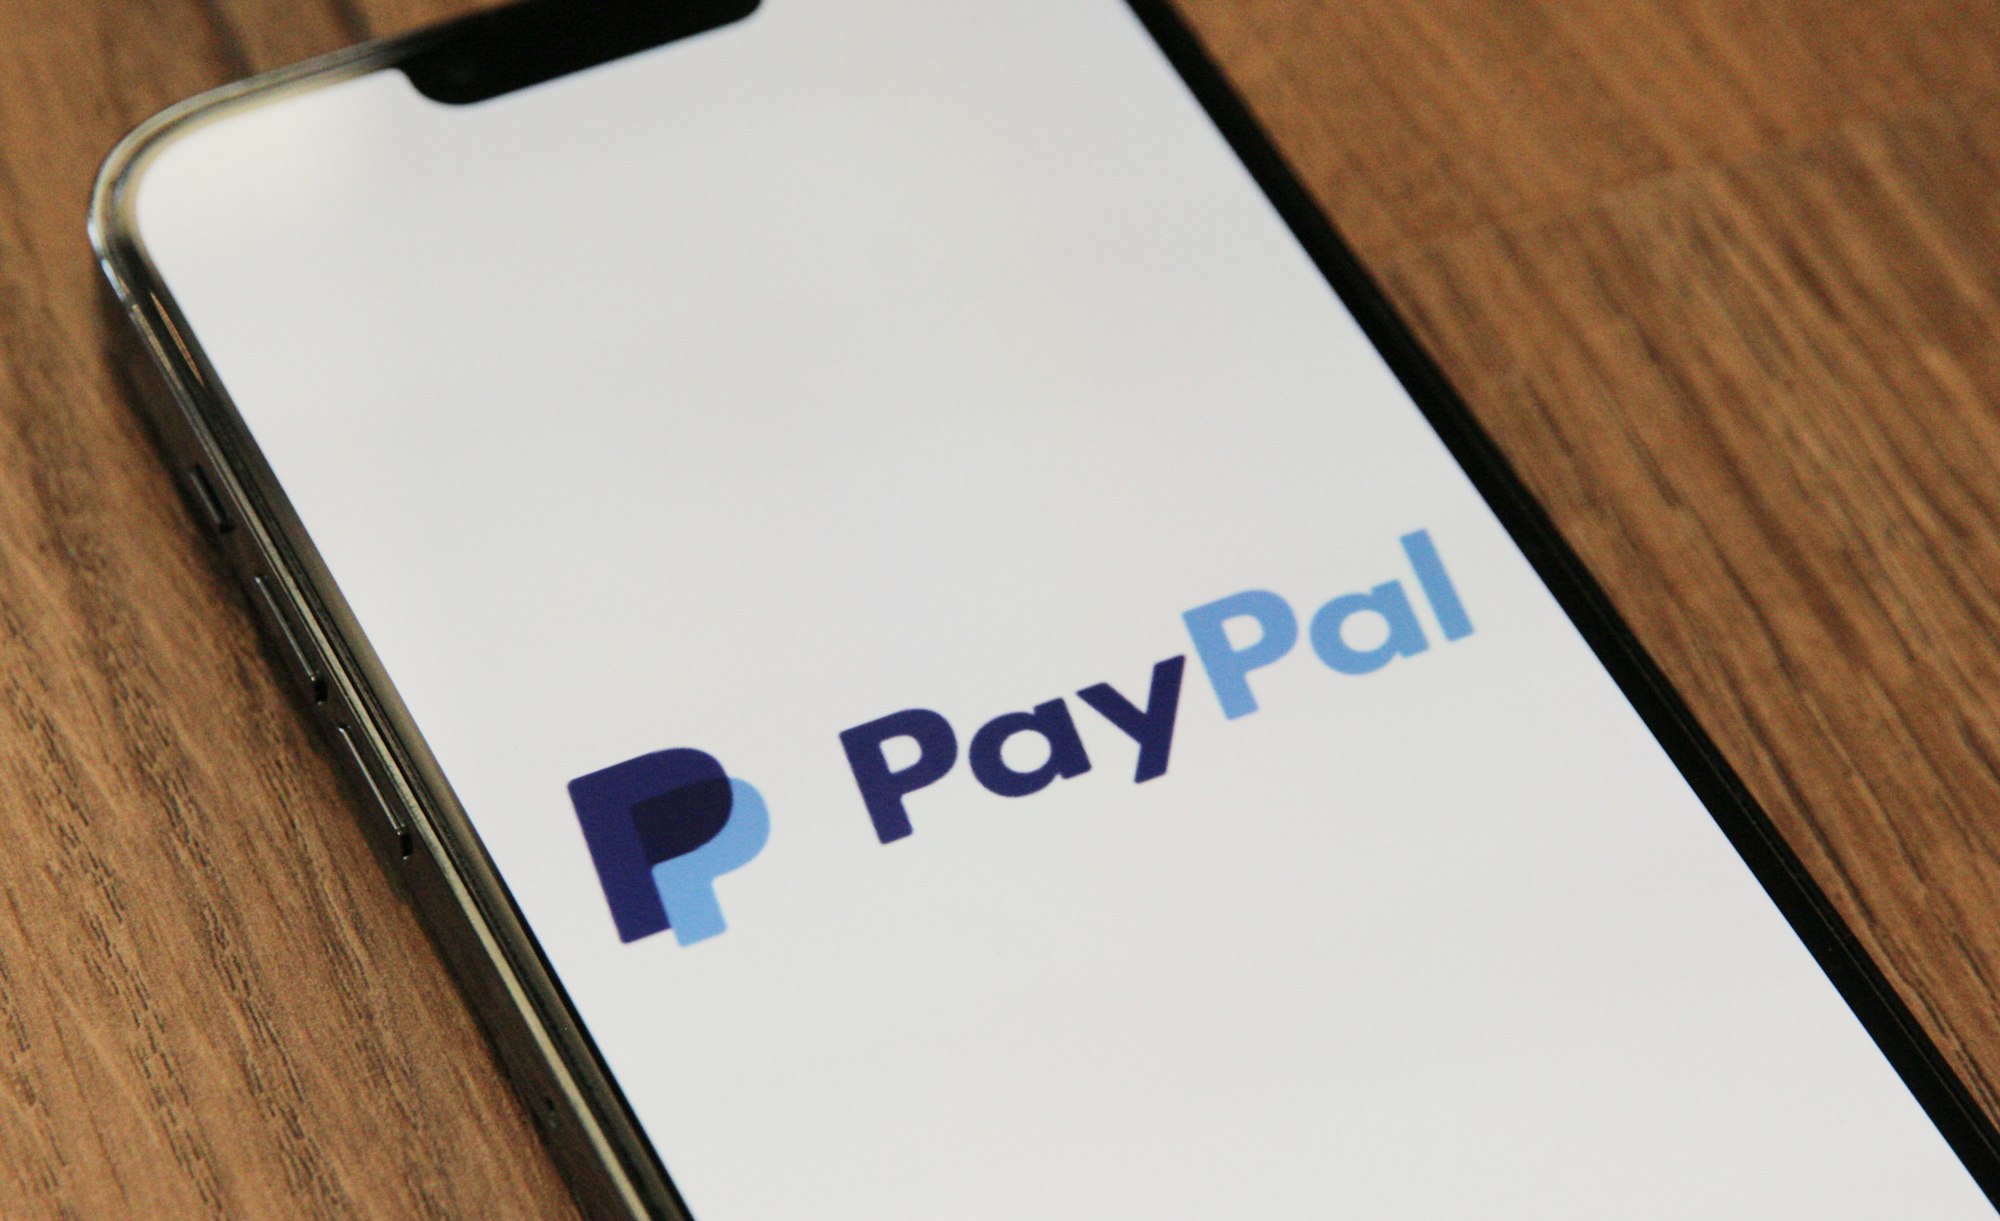 Paypal to cut 2,000 jobs globally